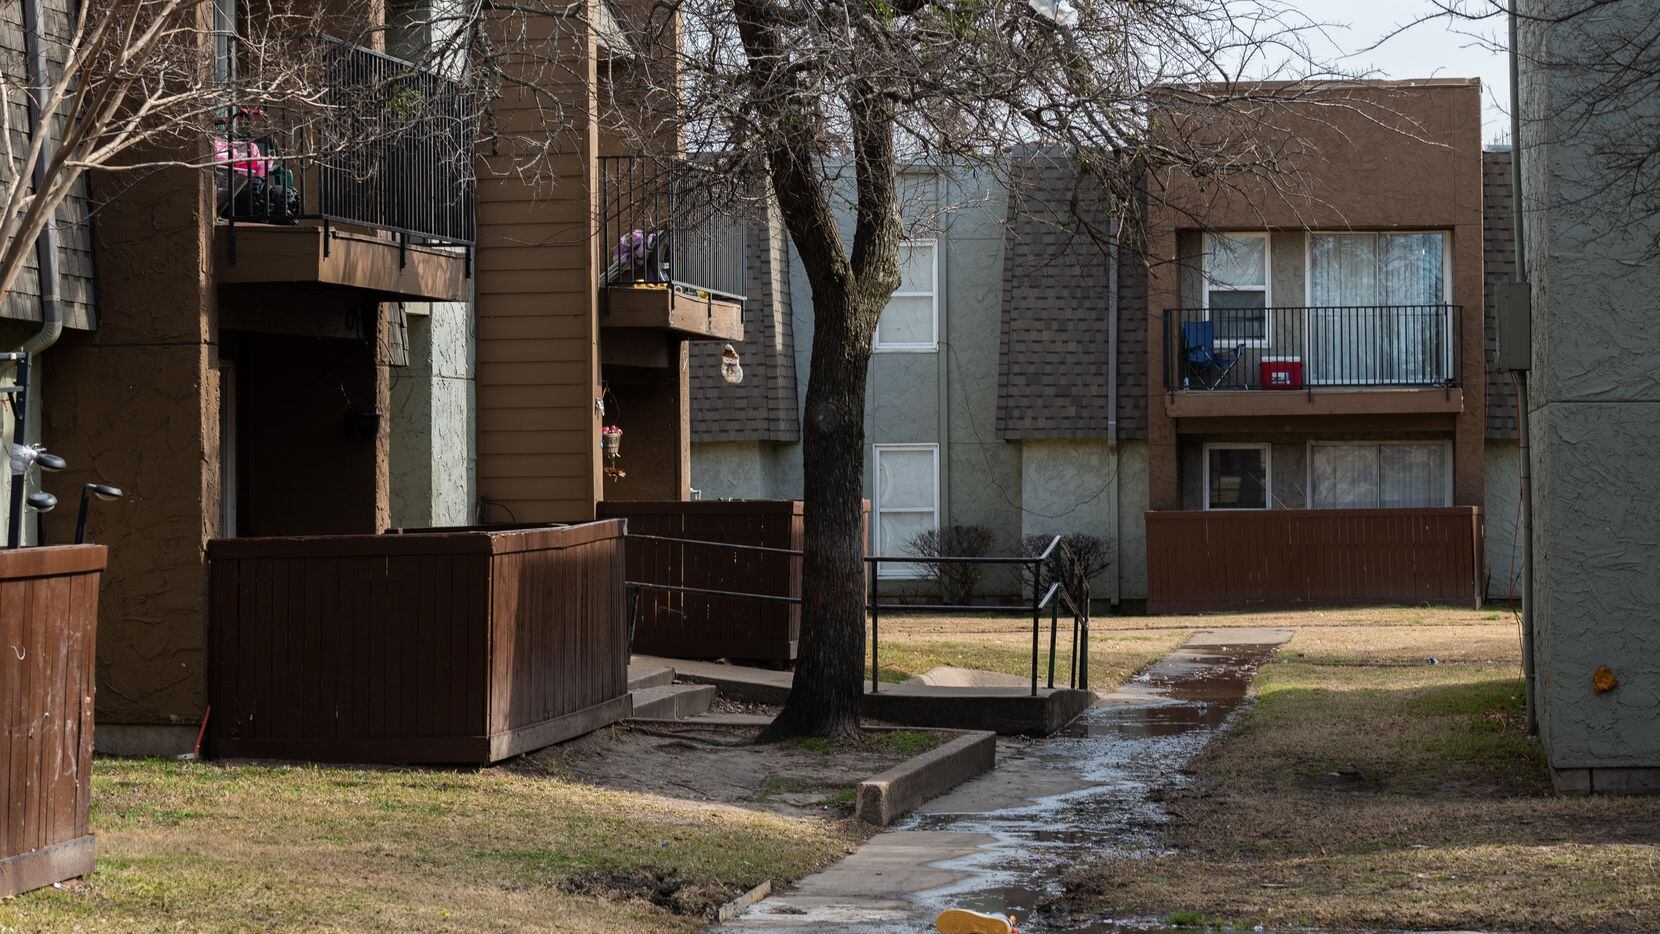 Sewer water flooded the sidewalks outside of units at the Hillcrest Apartments in Mesquite...